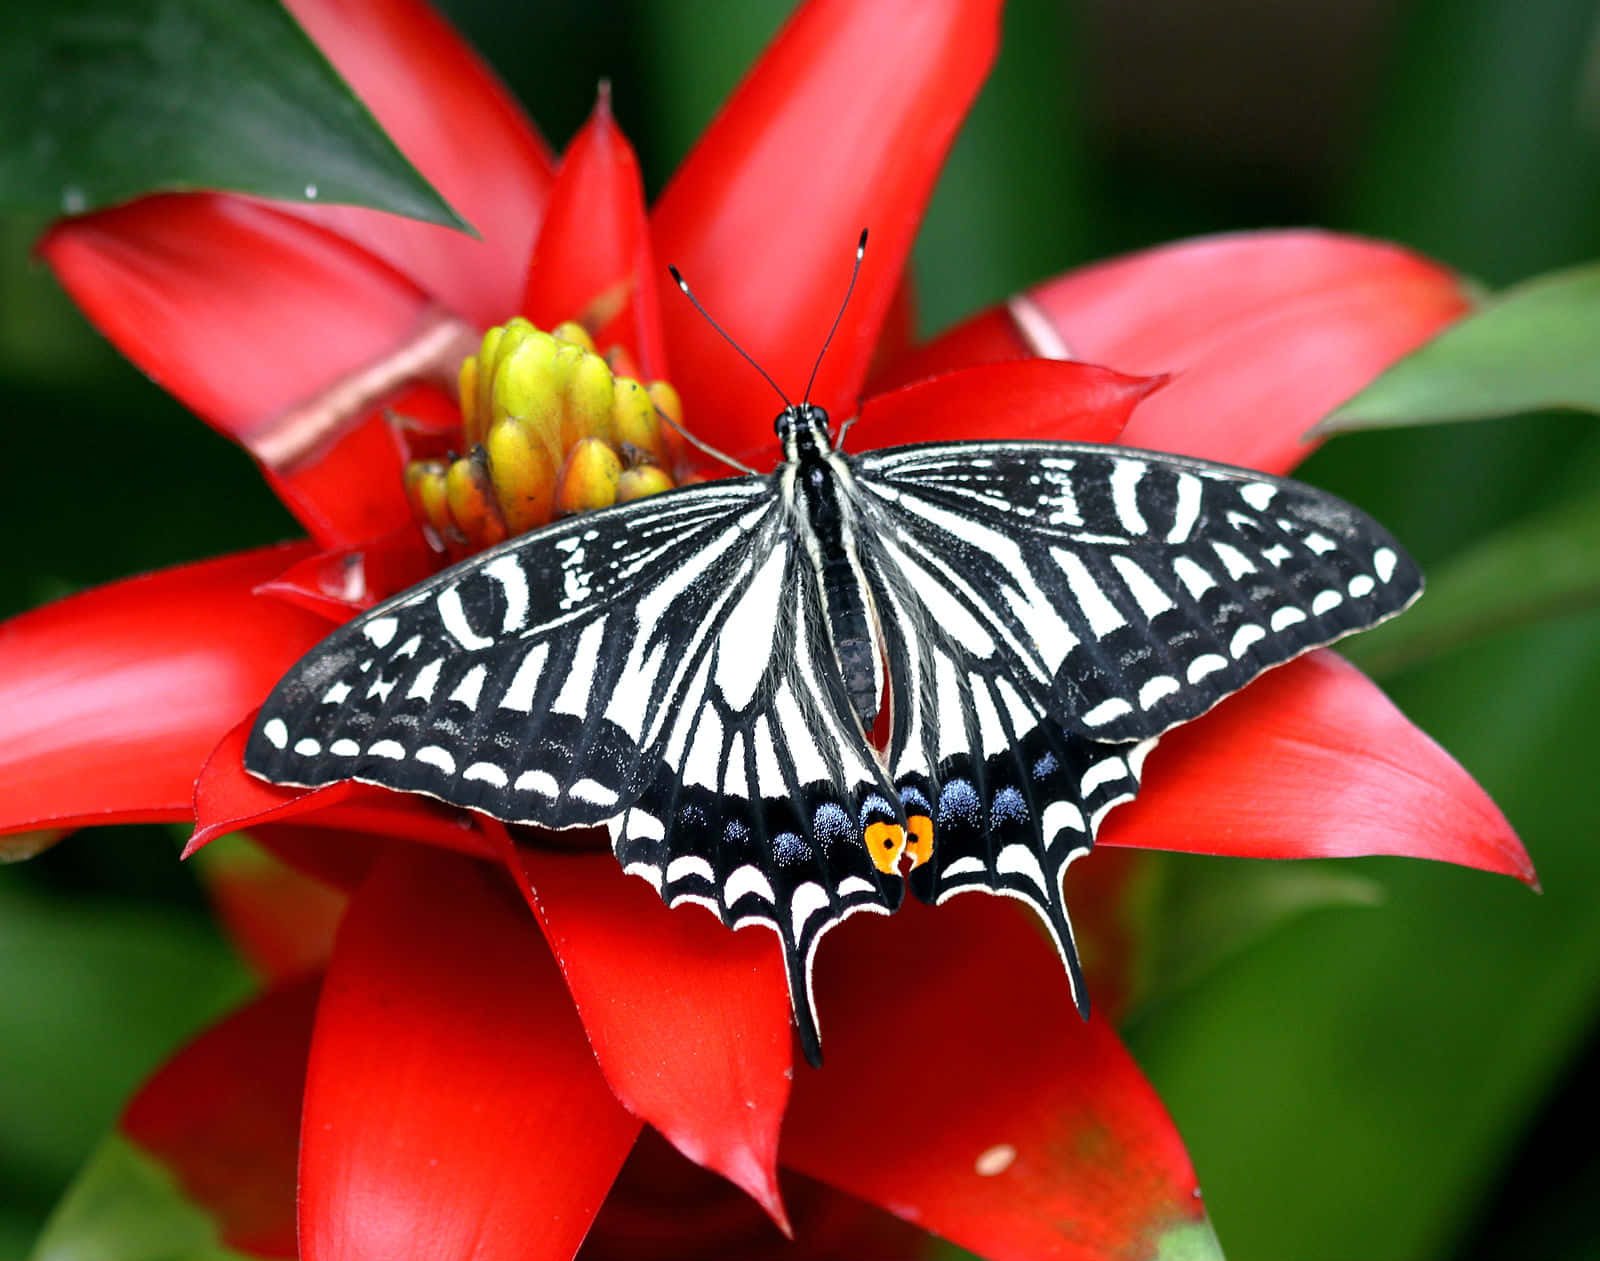 "A colorful butterfly species - A symbol of beauty, freedom and transformation" Wallpaper